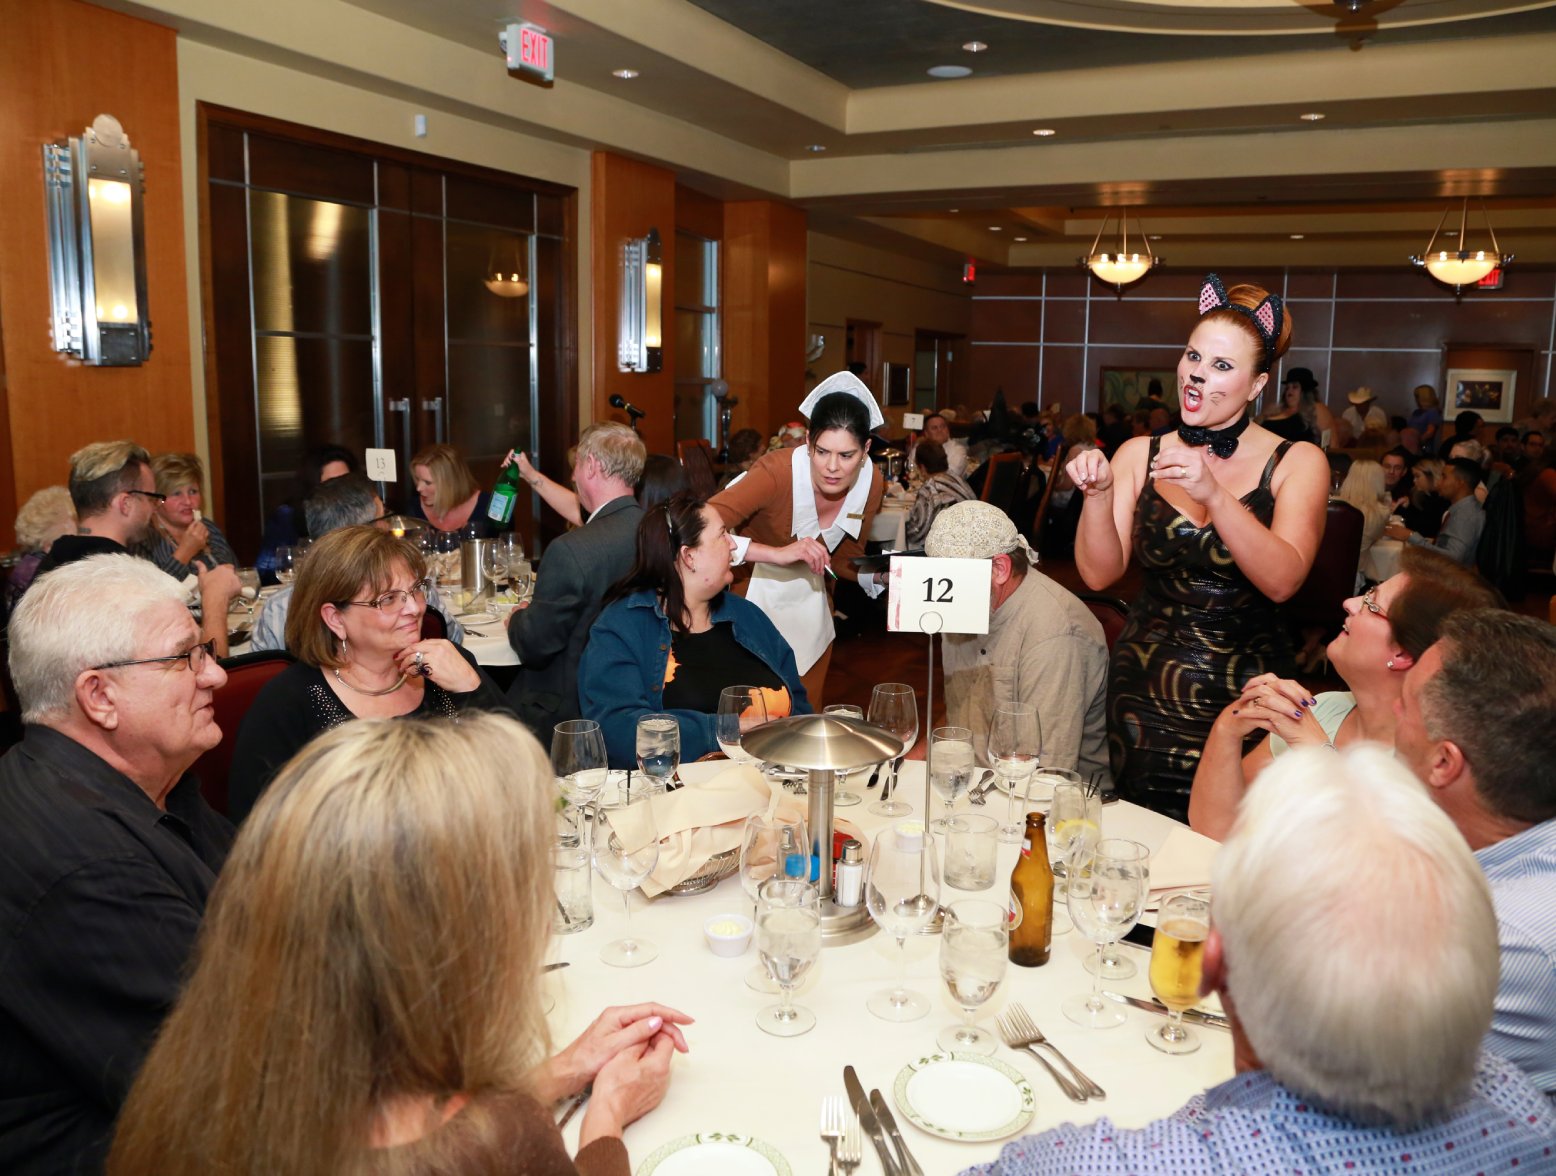 A group of people are sitting around a dining table at Lawry's Prime Rib. They are all smiling and looking at the server. Who is dressed in cat ears and whiskers. She has her hands up and her mouth open, like she is telling a story. The event is the St. Patrick's Day murder mystery dinner in Las Vegas, which many families enjoy for the holiday.